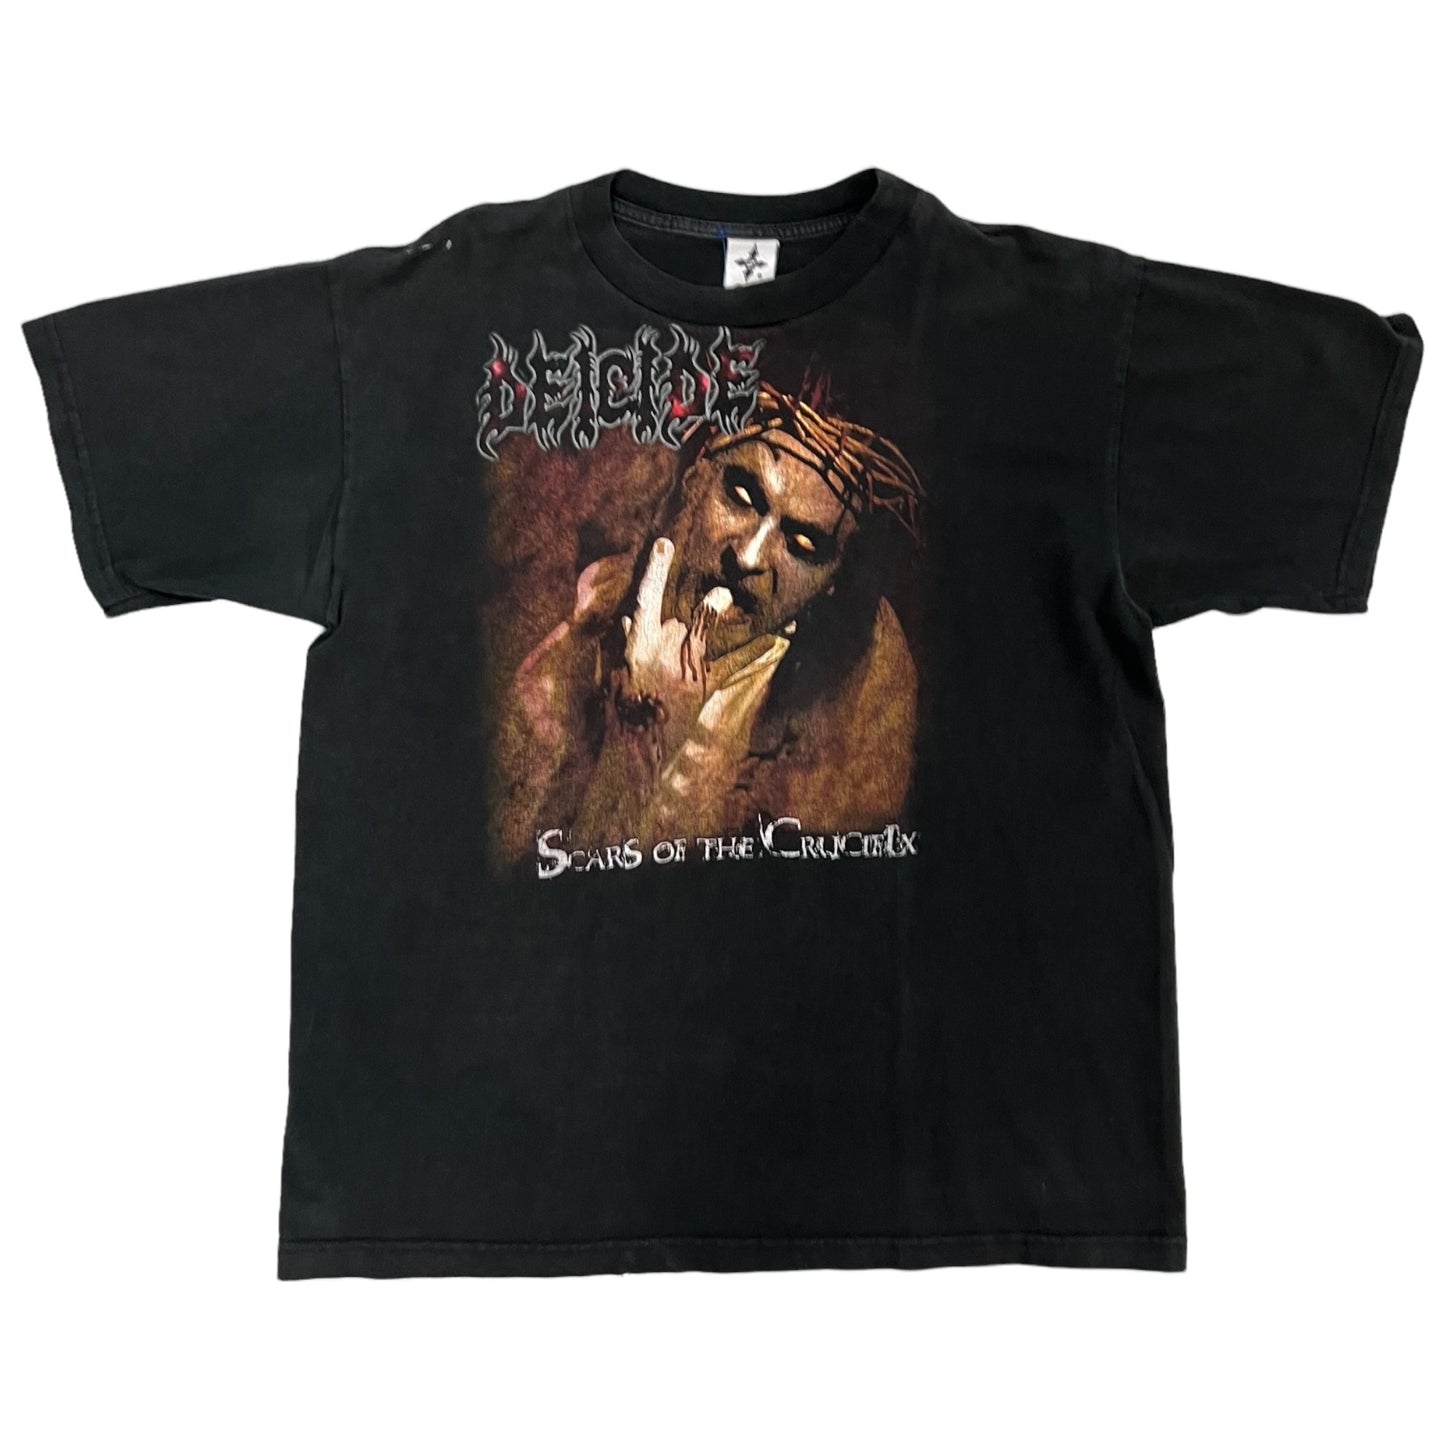 1990's Deicide “Scars of the Crucifix” vintage band tee